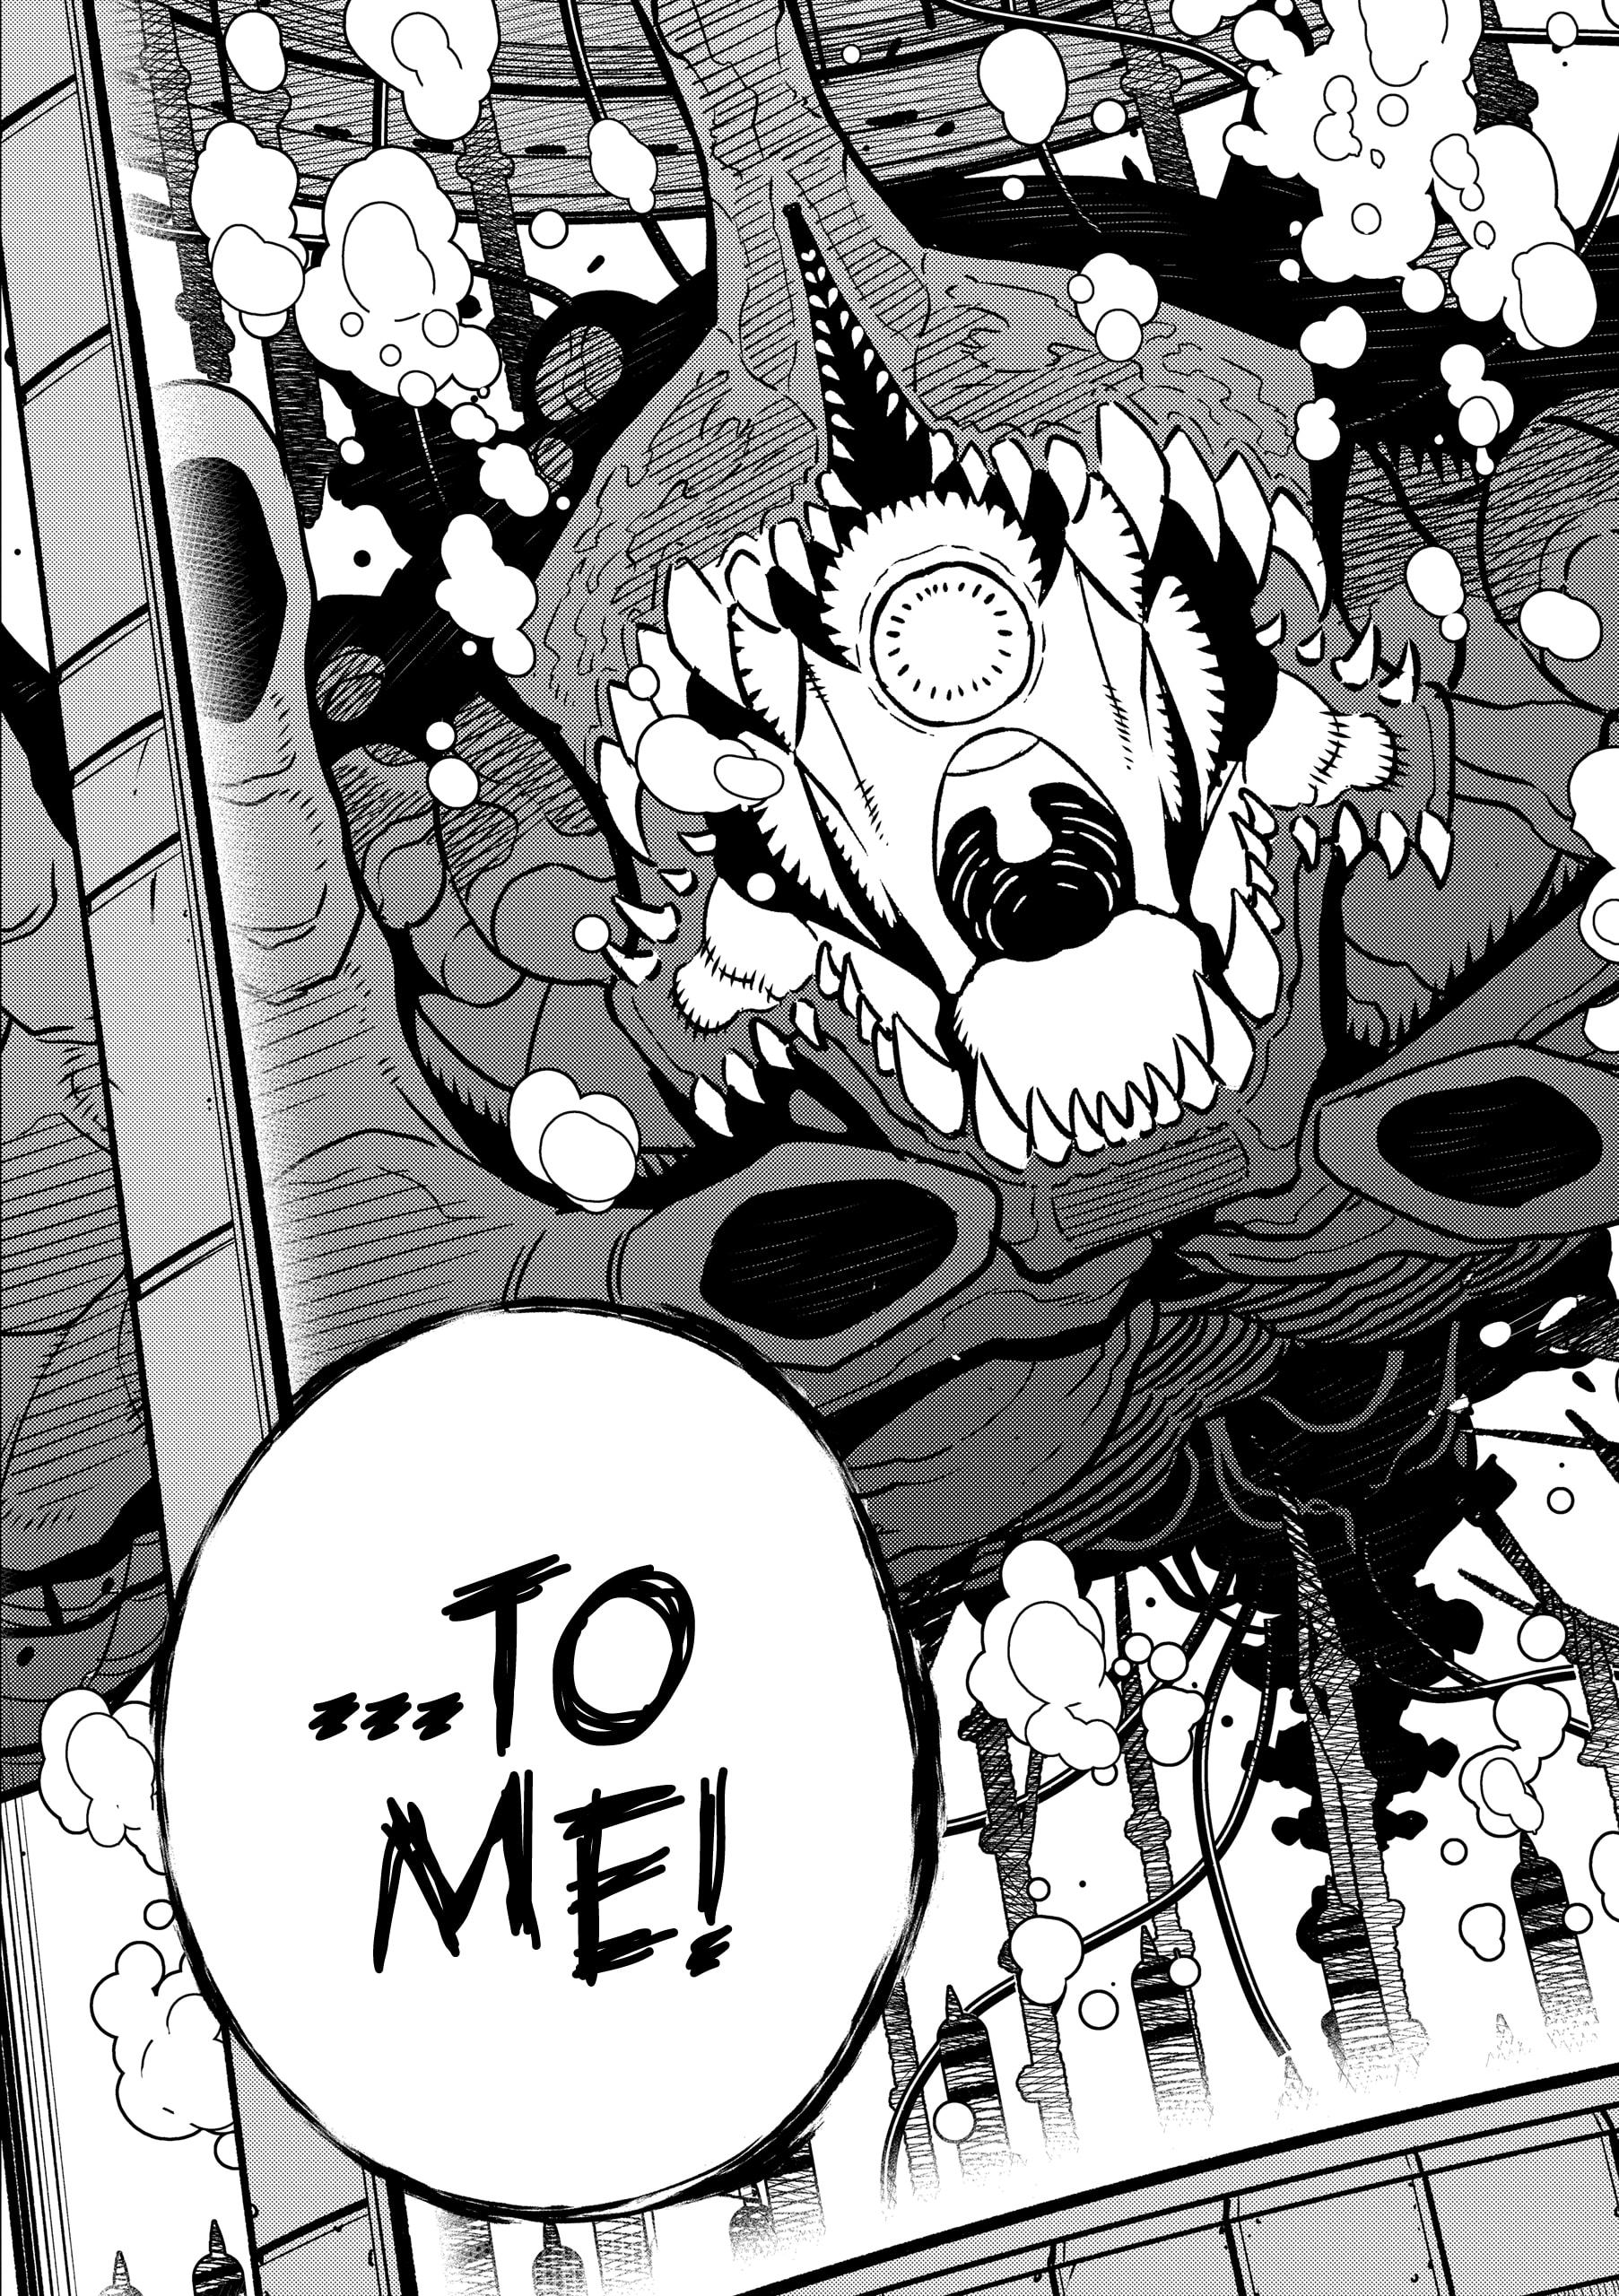 Kaiju no 8 Chapter 56, monster #8 chapter 56